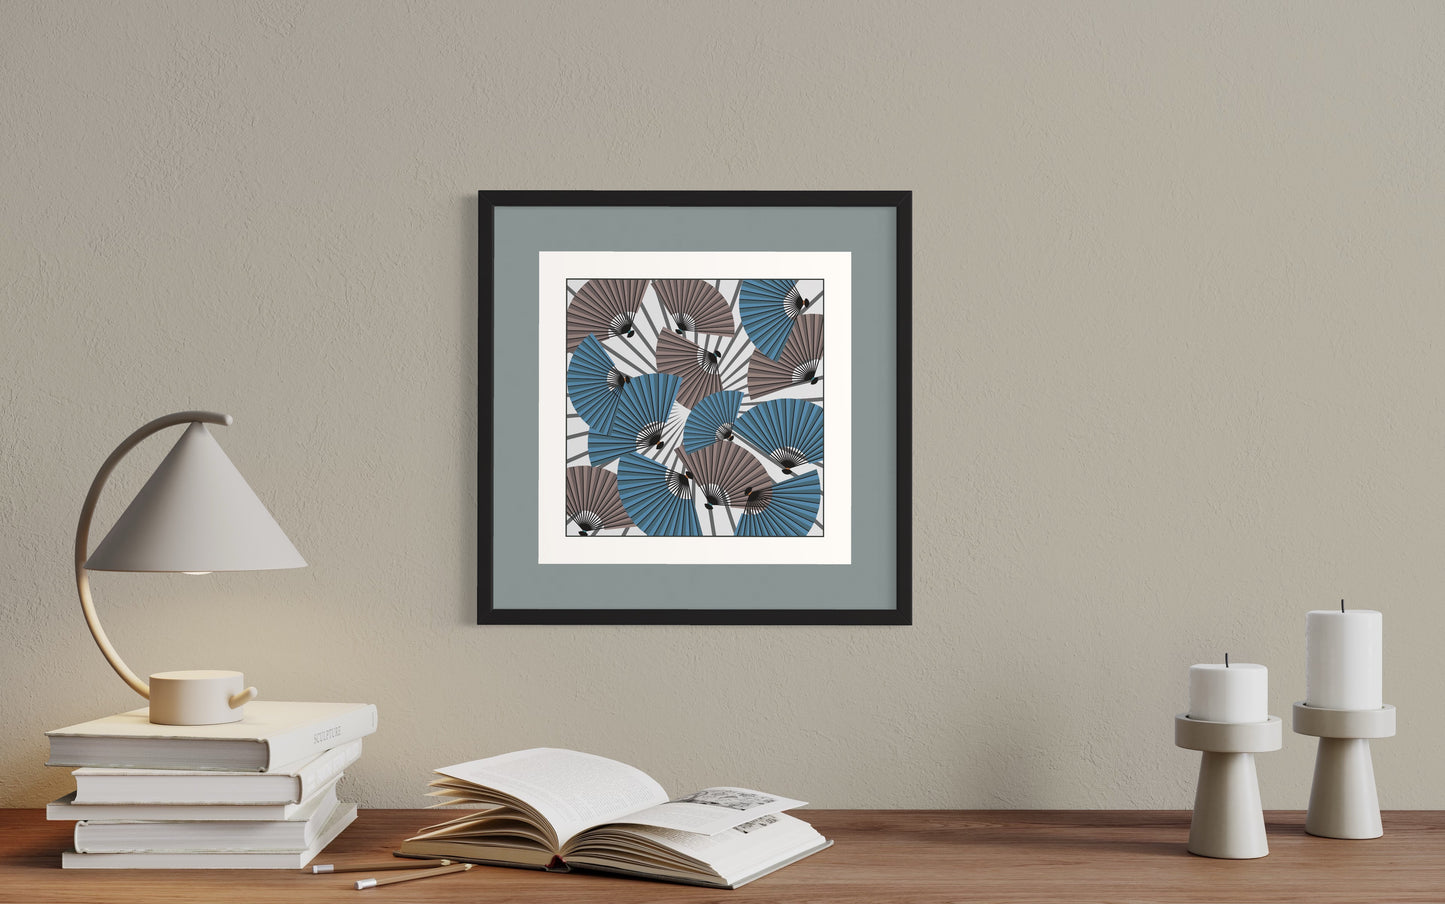 Japanese Inspired Square Print Designs:  Fans